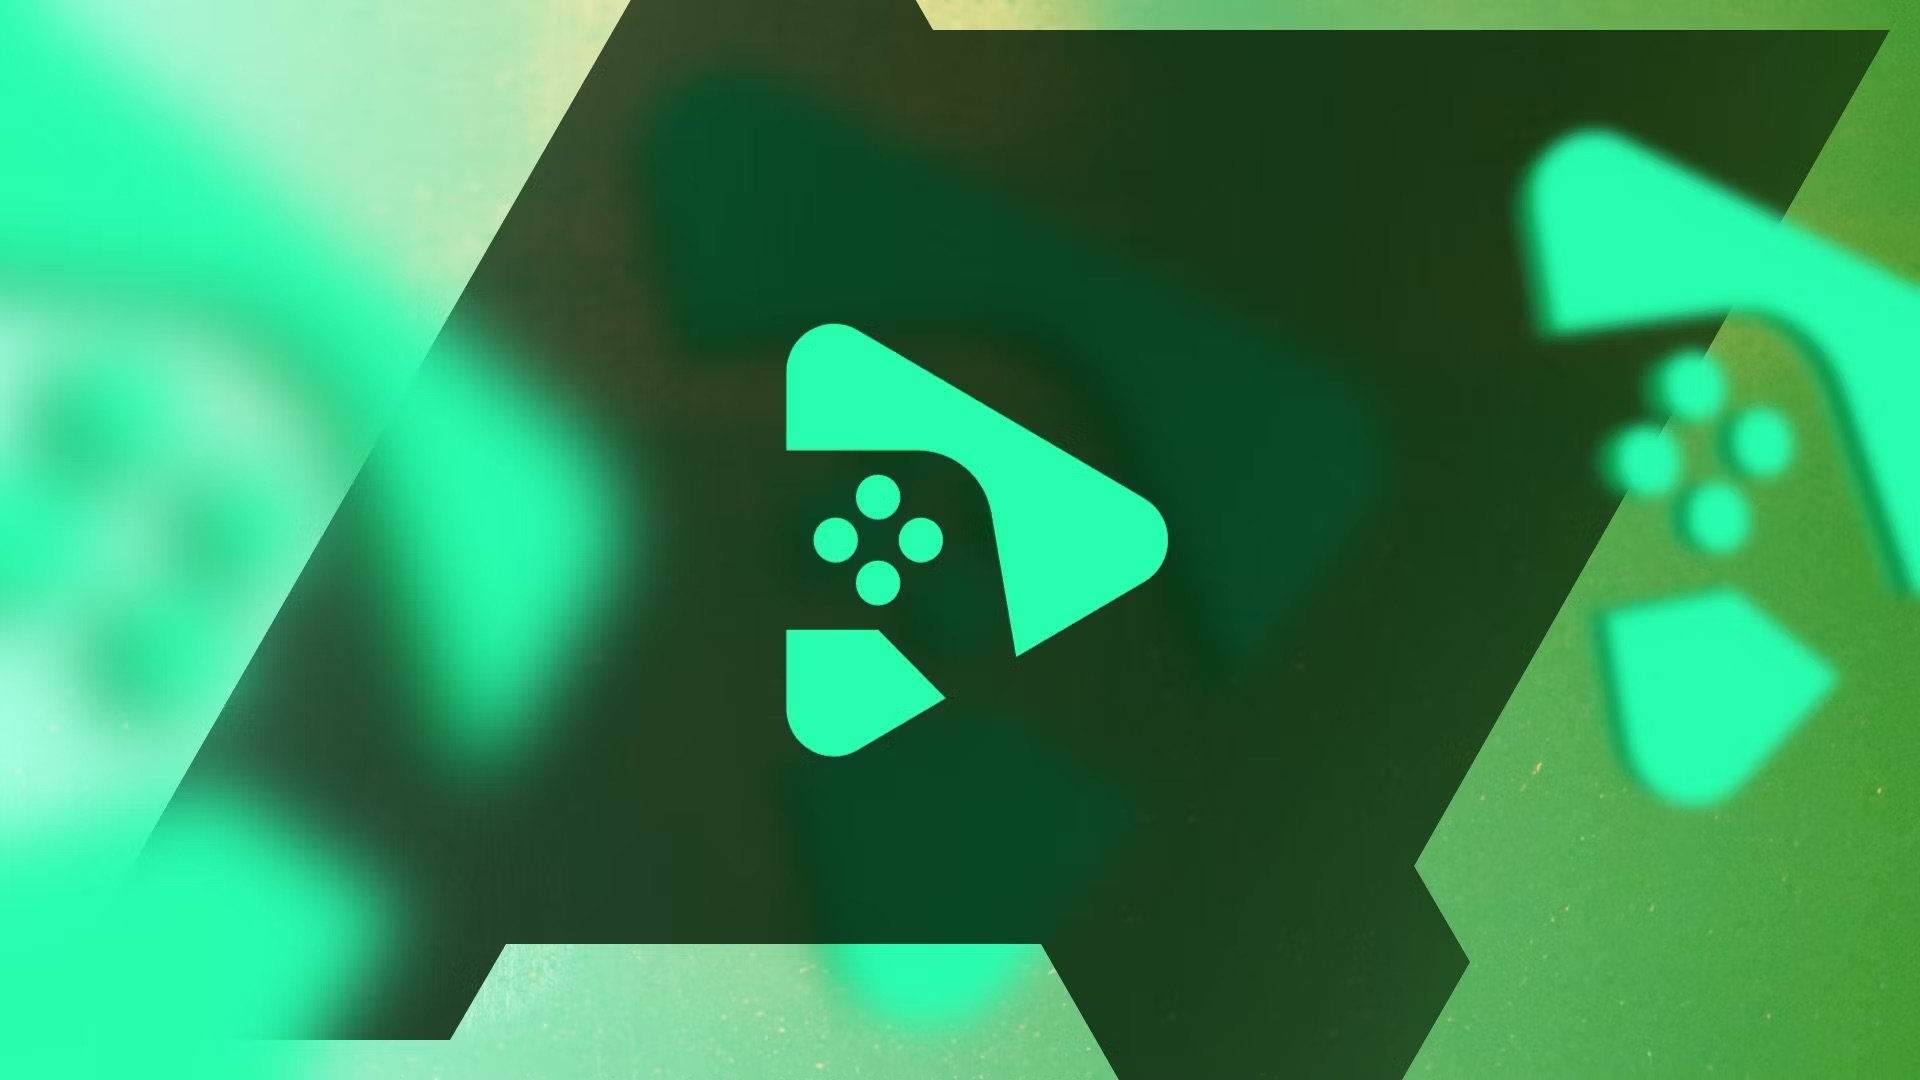 Google Play Games Beta Download on PC, Play Android Games on PC Without  Emulator